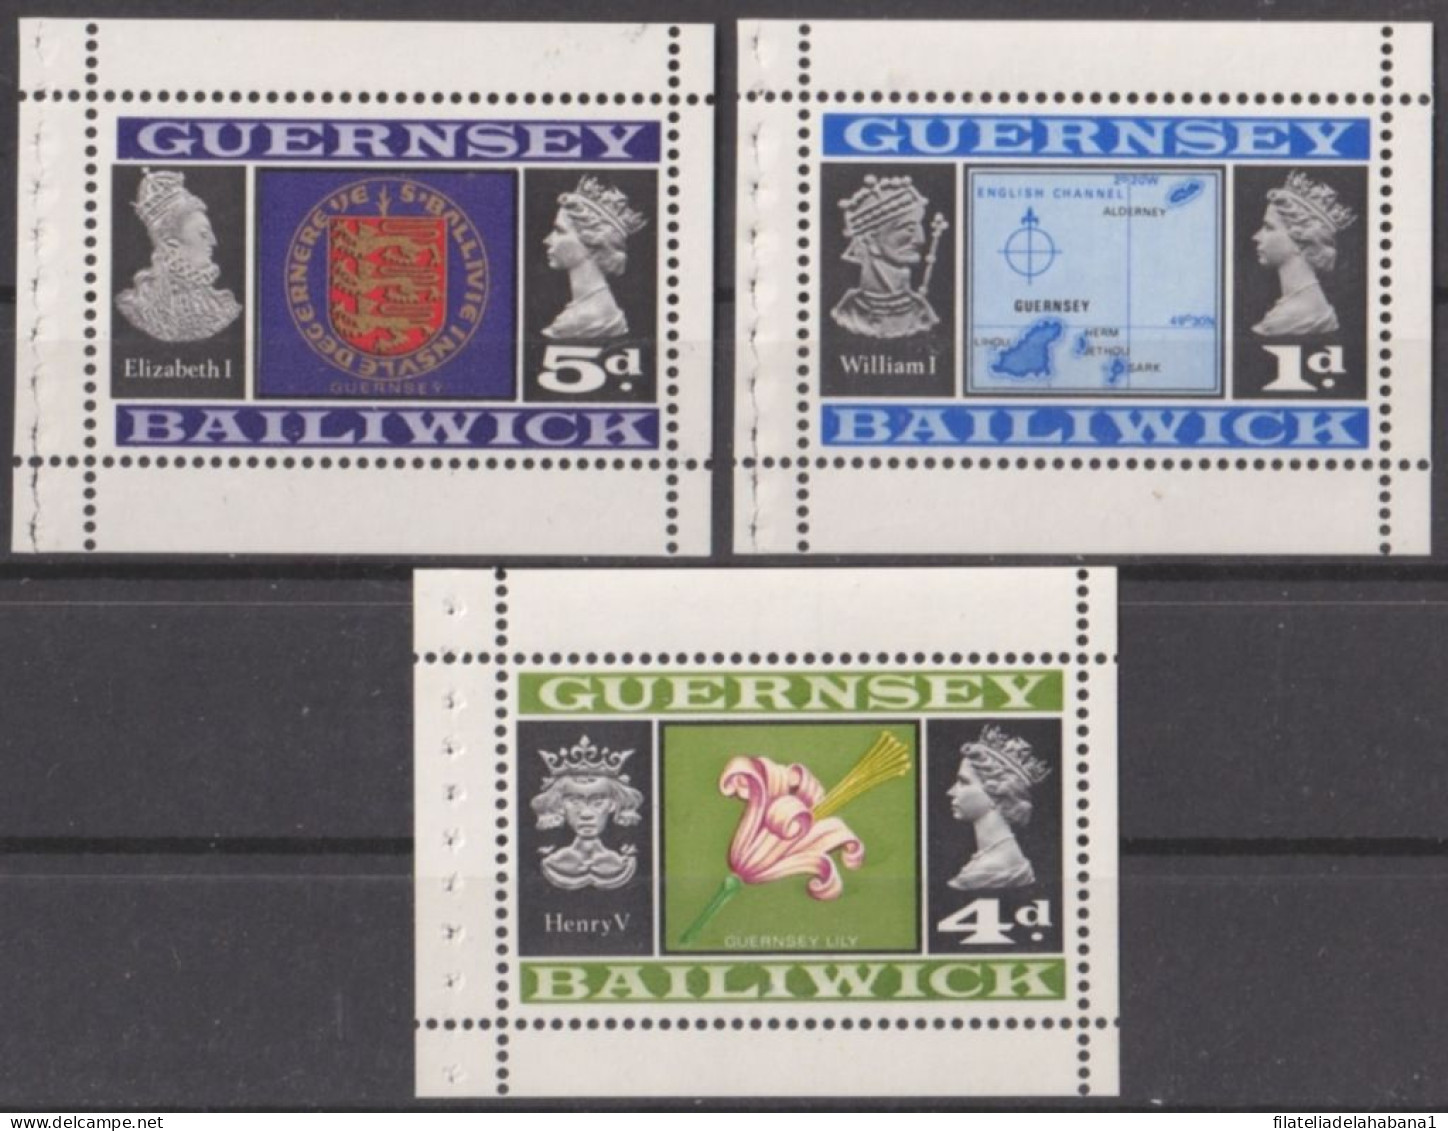 F-EX50275 GUERNSEY ENGLAND UK GB MNH 1965-70 BOOKLET LILY FLOWER MAP COAST ARMS.  - Guernsey